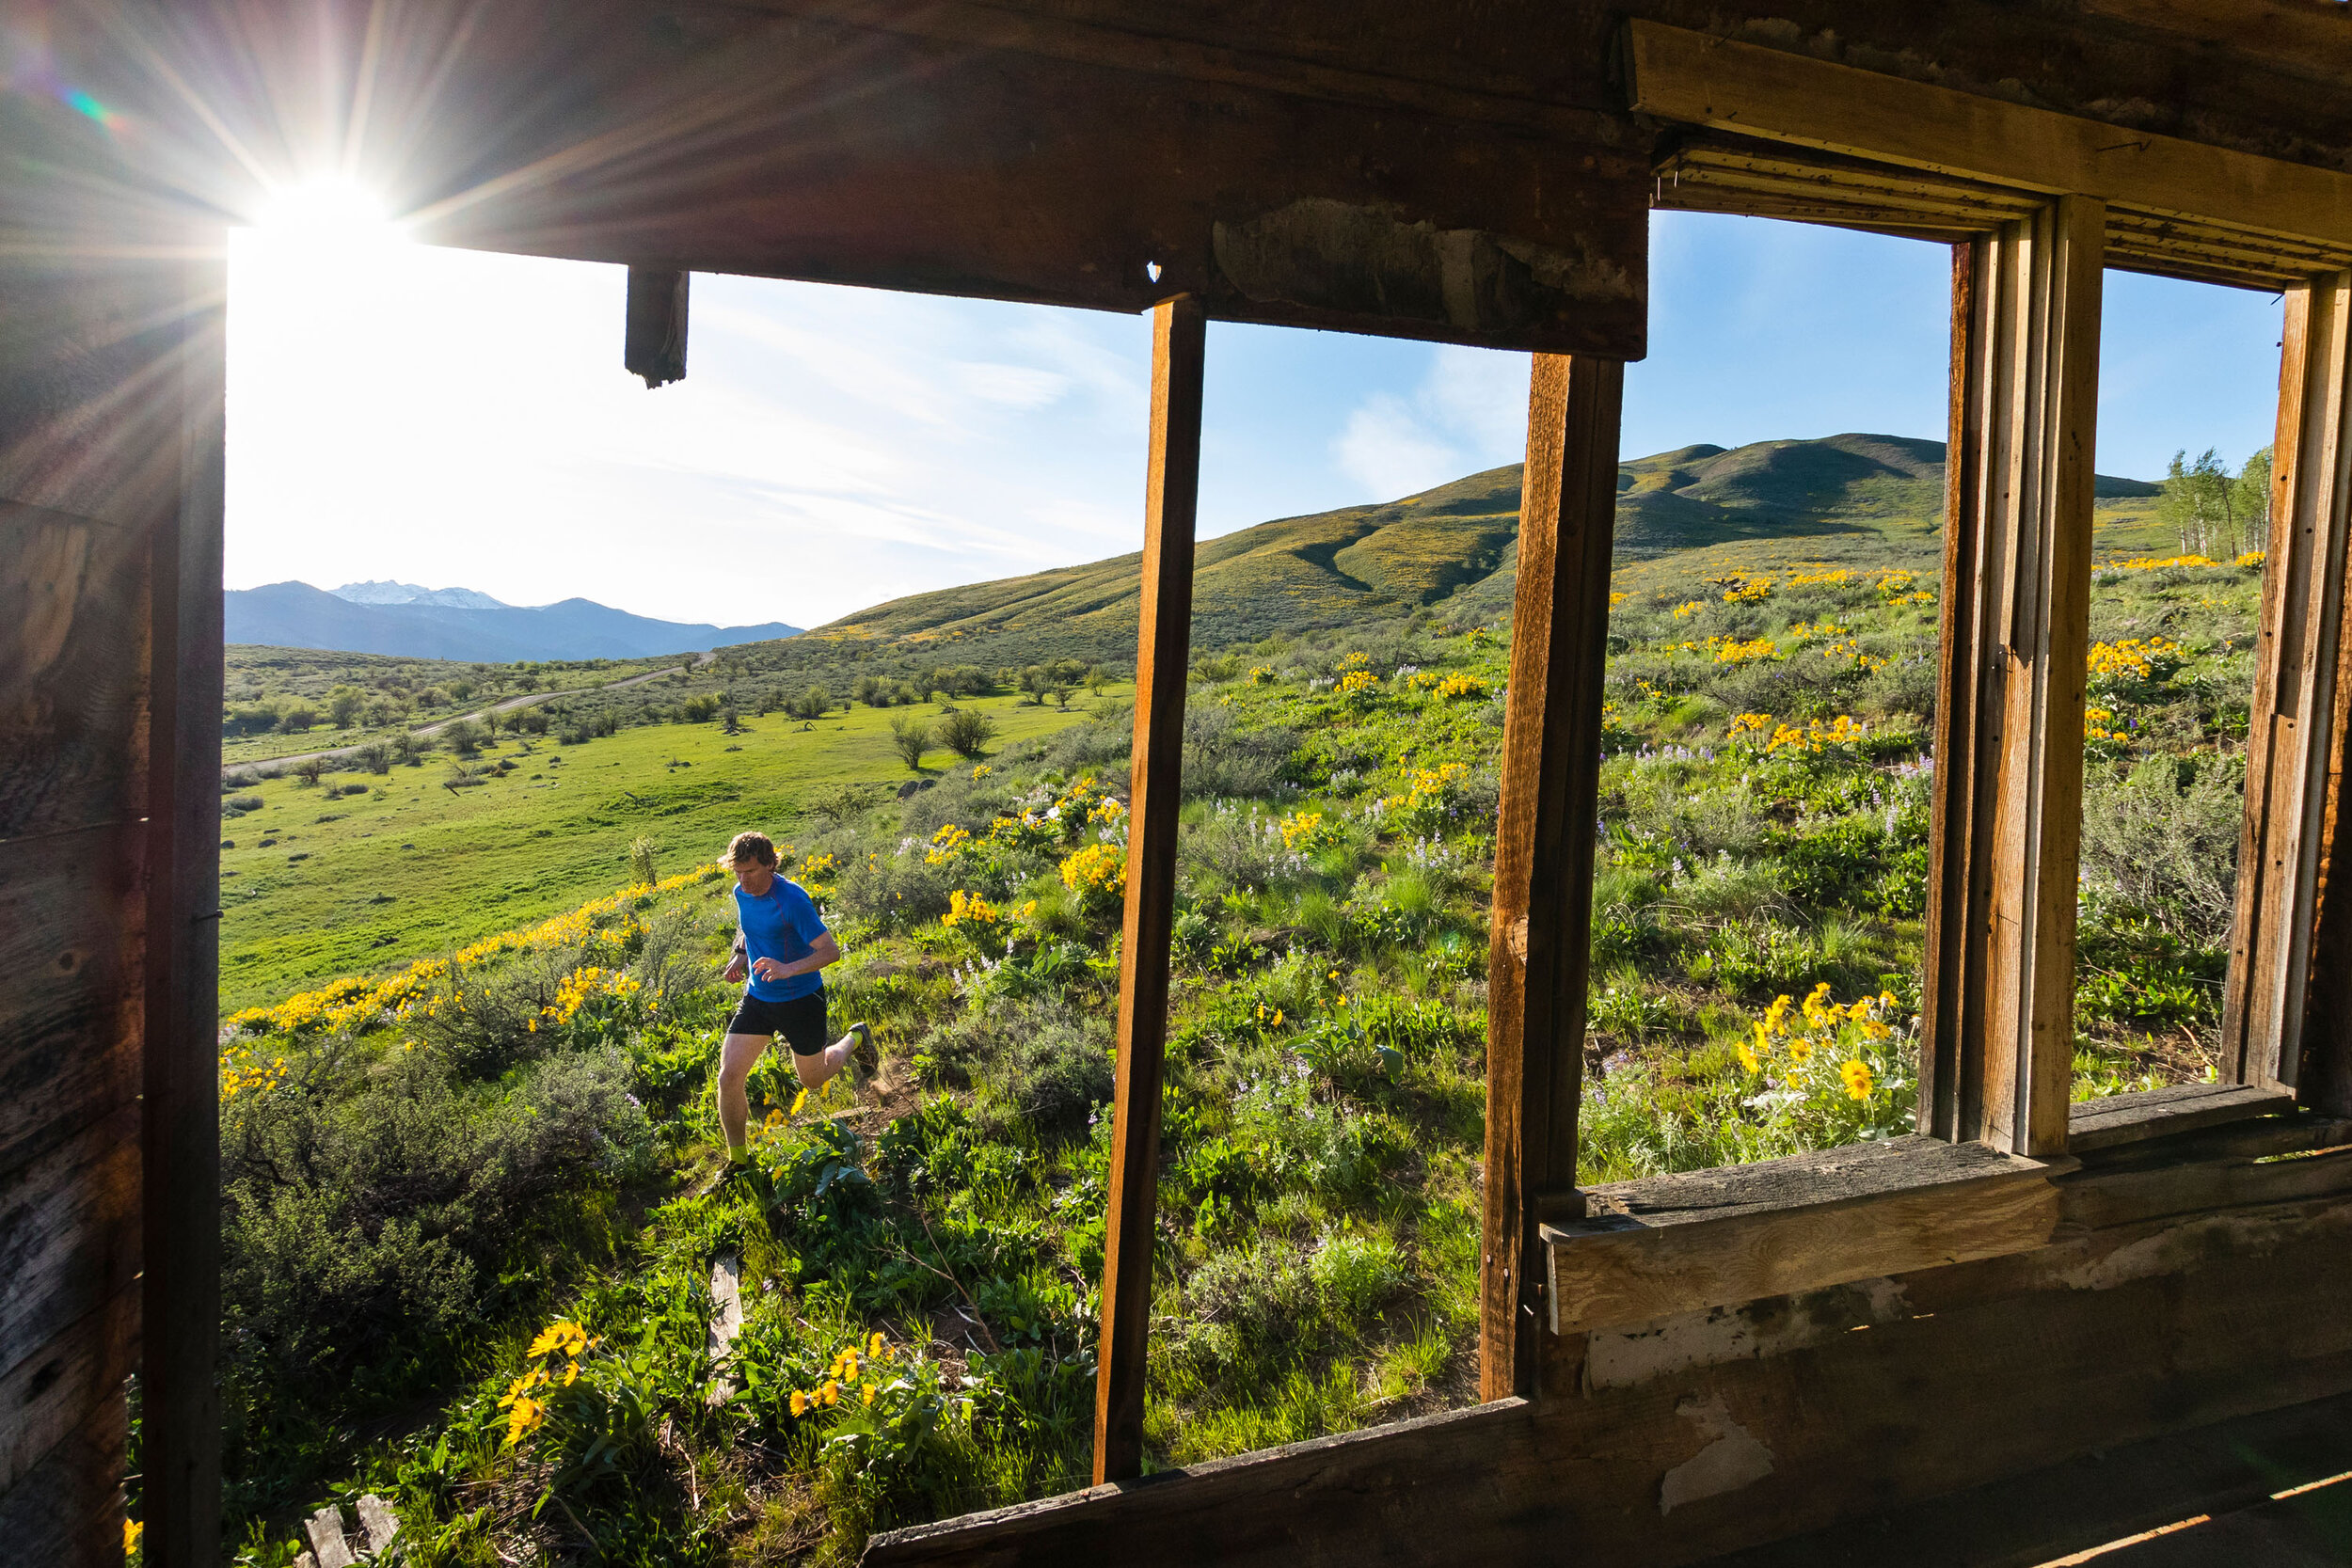  Adventure: Chris Solomon trail running past an old abandoned house in the Methow Valley in spring, Washington 